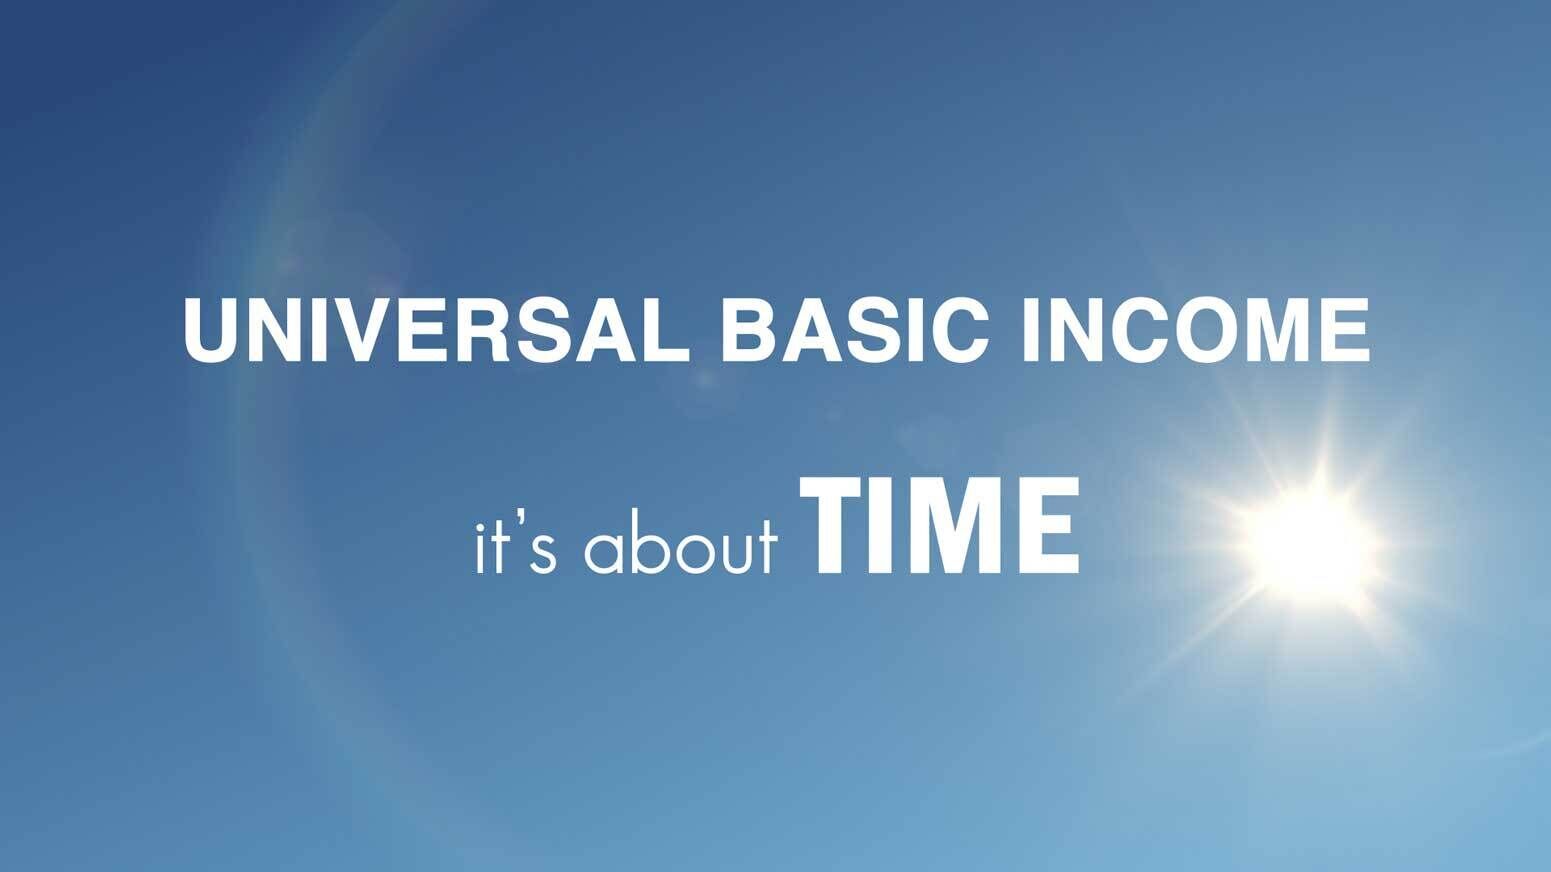 This commercial video parodies advertisements and commercials with stock images and stock footage with multiple figures. There are interior suburban home visuals and exterior outdoors visuals set in a park on a sunny day. The video is a conceptual advertisement for a universal basic income.